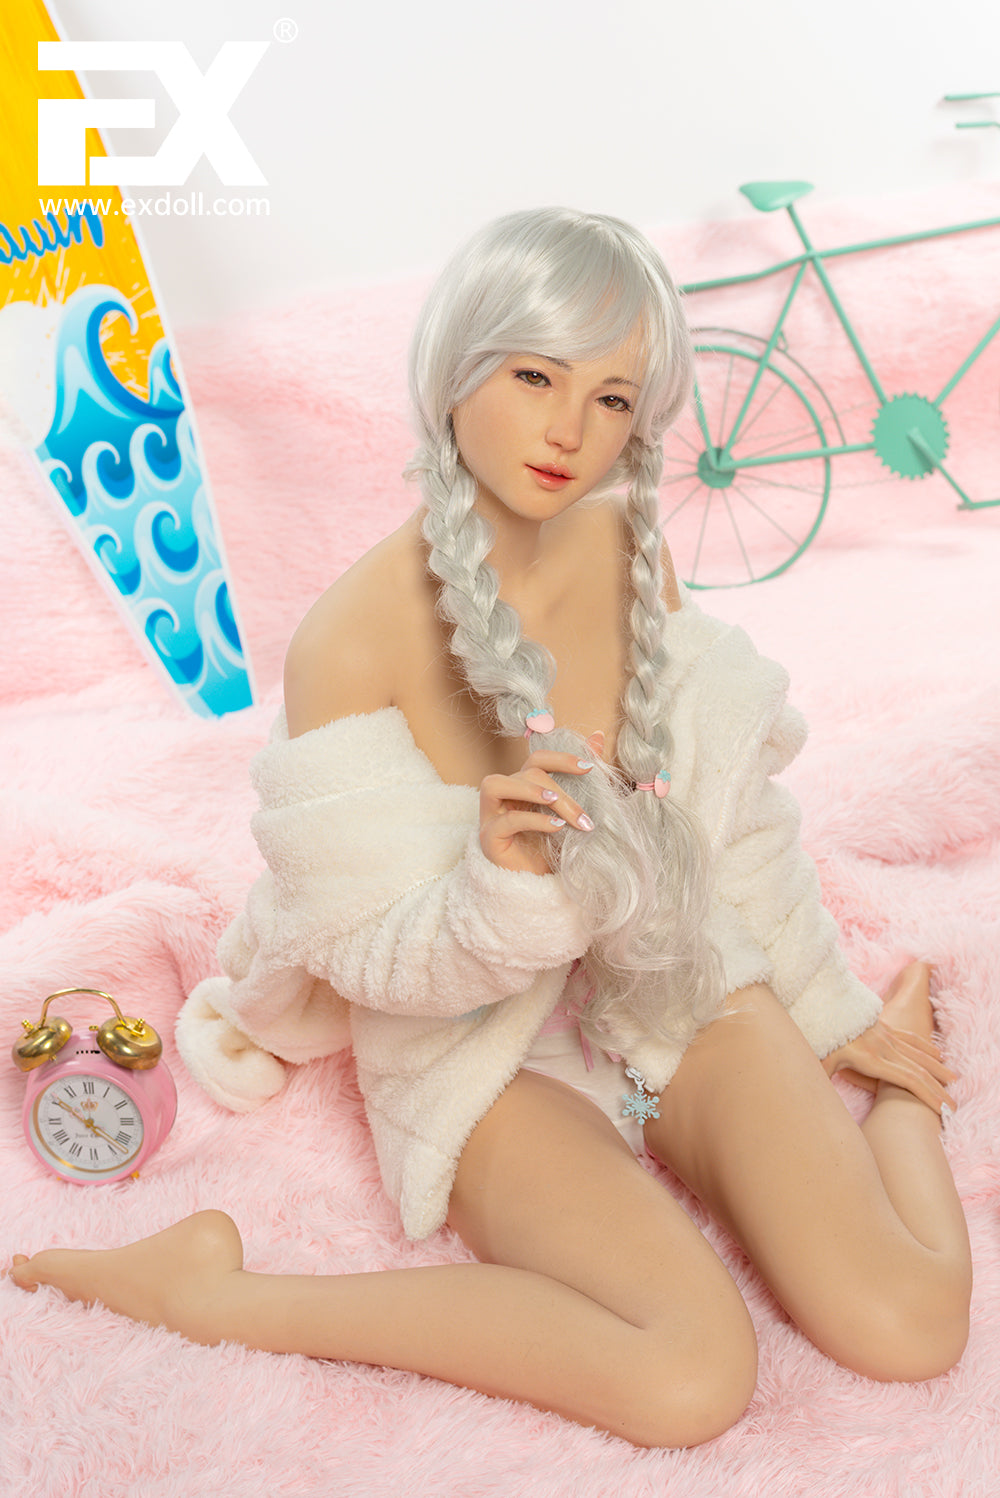 EX Doll Summit Series 152 cm Silicone - Jodie | Buy Sex Dolls at DOLLS ACTUALLY